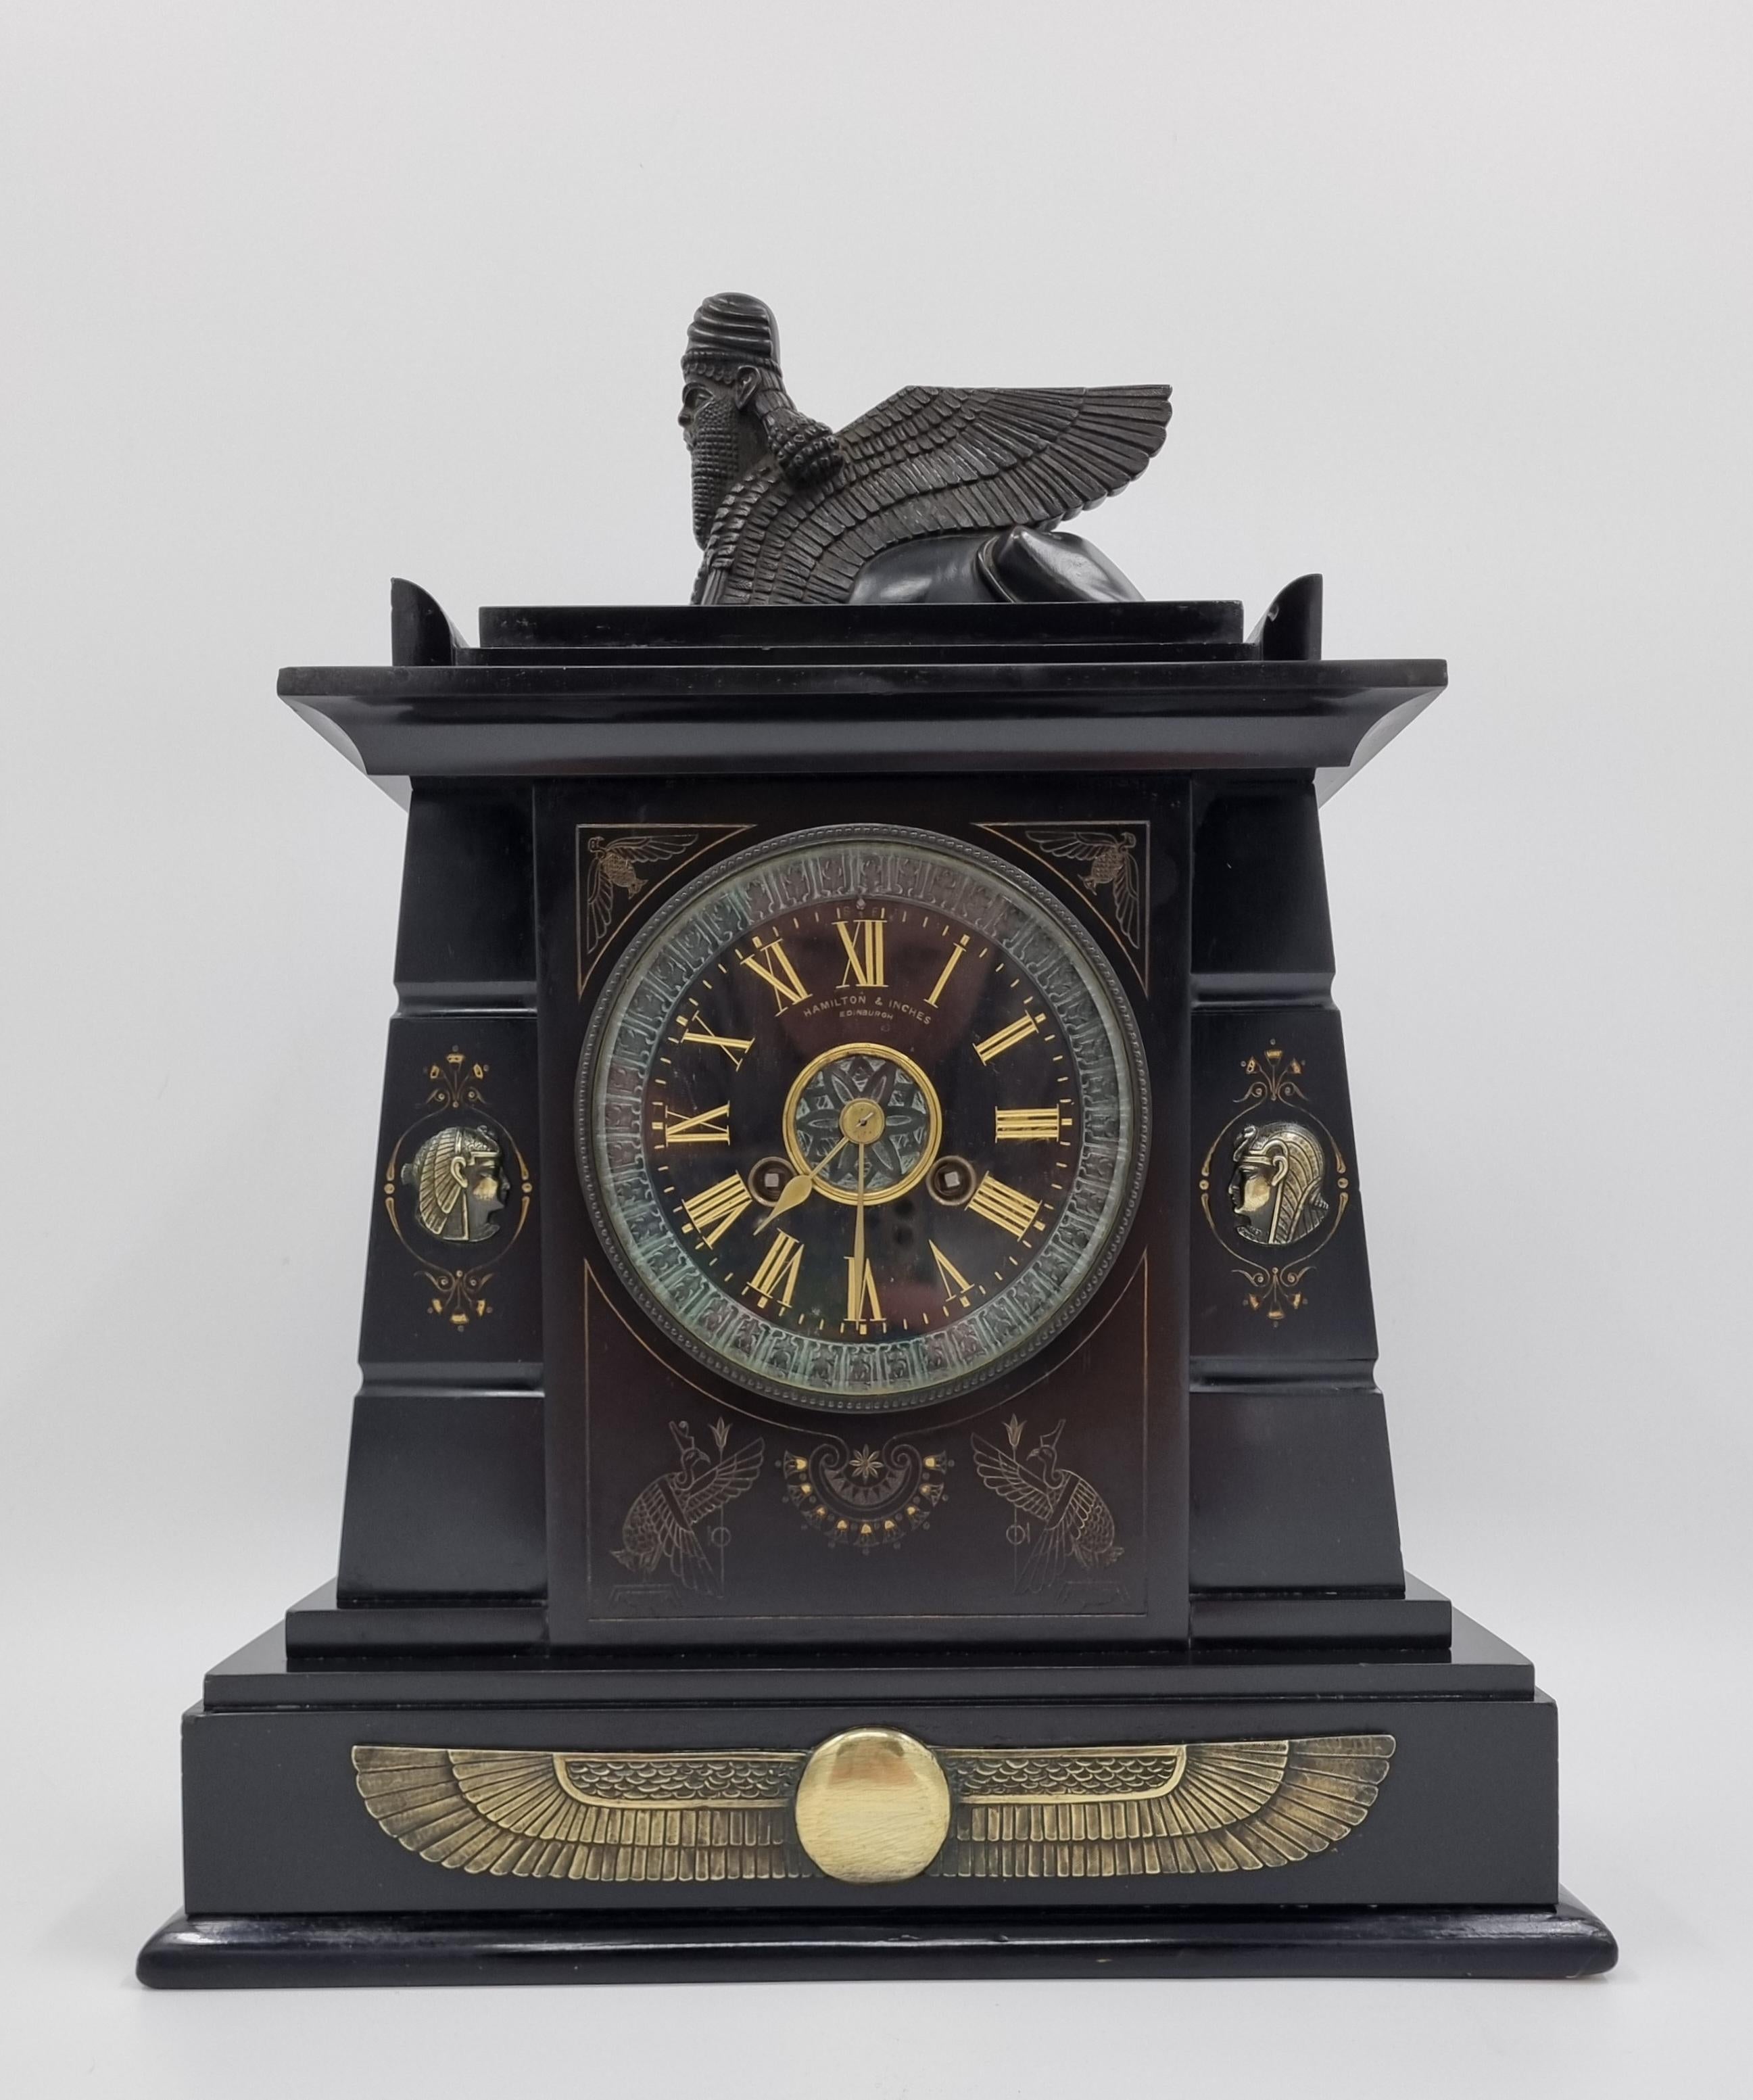 An Egyptian Revival Black Marble Clock

Circa 1860s made by the renowned clock and jewellery makers Hamilton and Inches of Edinburgh with Royal warrant granted by Queen Victoria in 1893 . 

Featuring a stunning black marble case engraved with